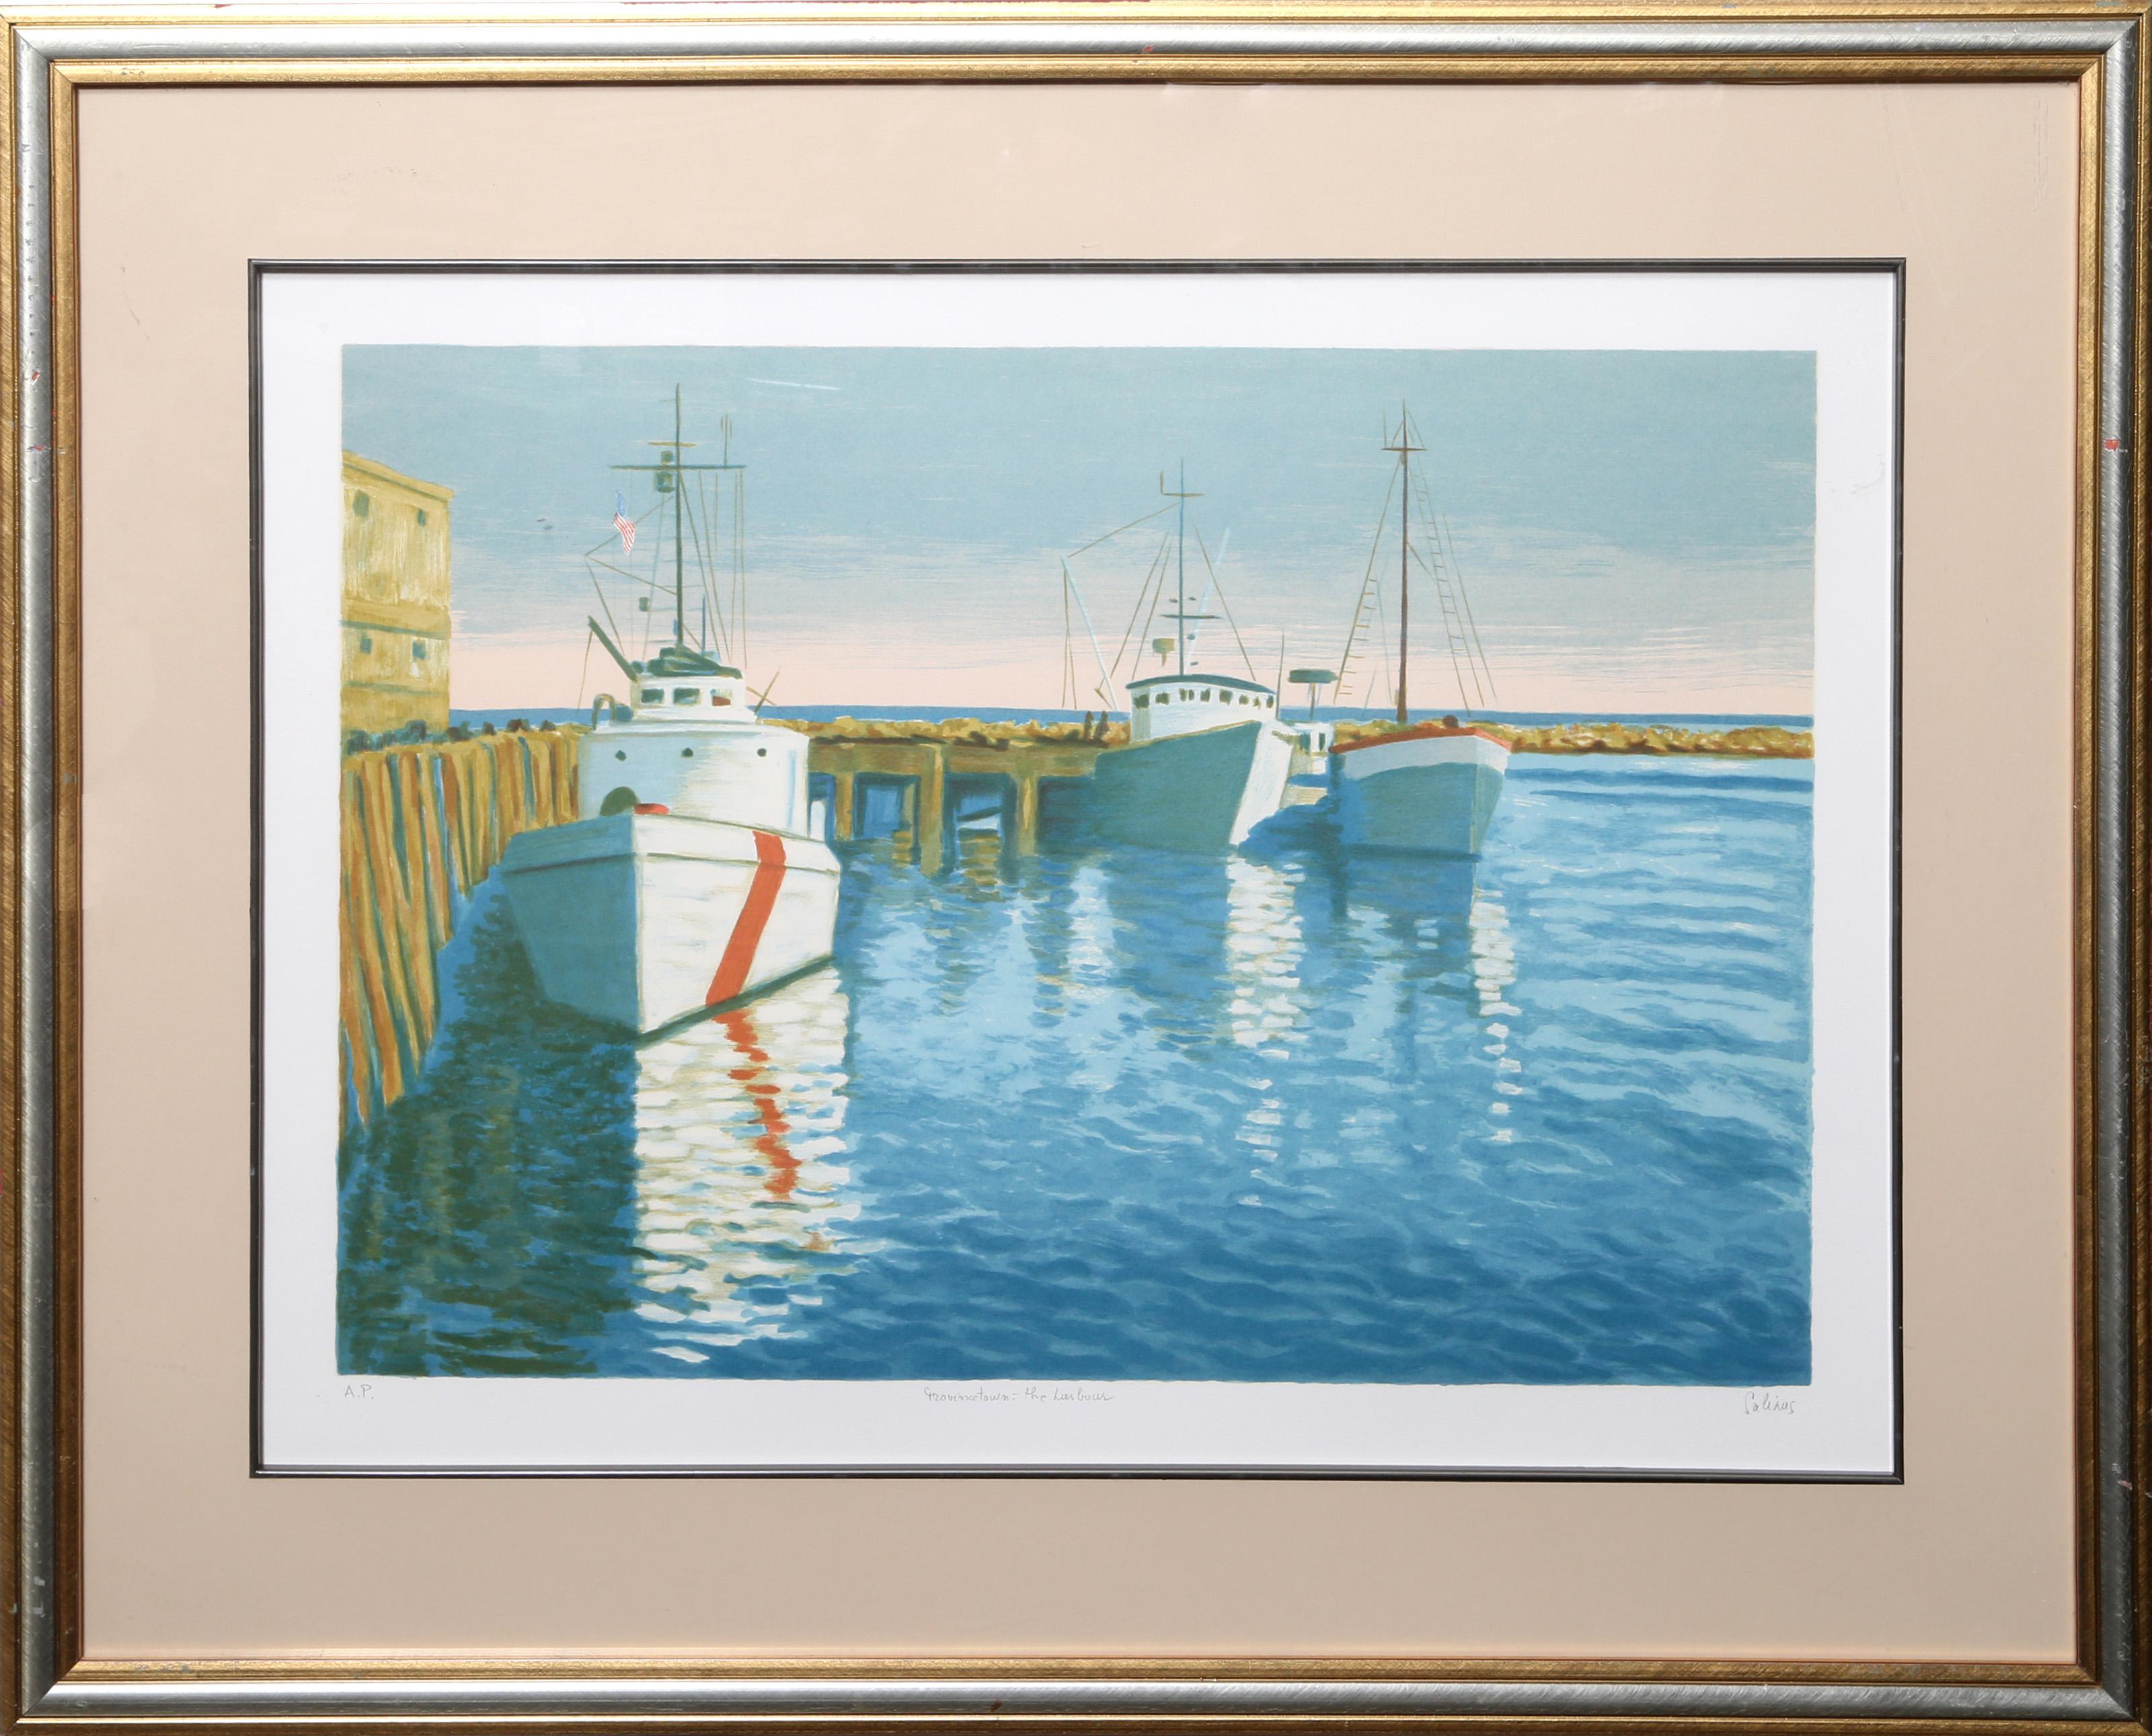 Laurent Marcel Salinas, Egyptian/French (1913 - 2010) -  Provincetown, The Harbor. Year: circa 1980, Medium: Lithograph, signed and numbered in pencil, Edition: AP, Image Size: 17.5 x 25 inches, Size: 22 x 30 in. (55.88 x 76.2 cm), Frame Size: 30.5